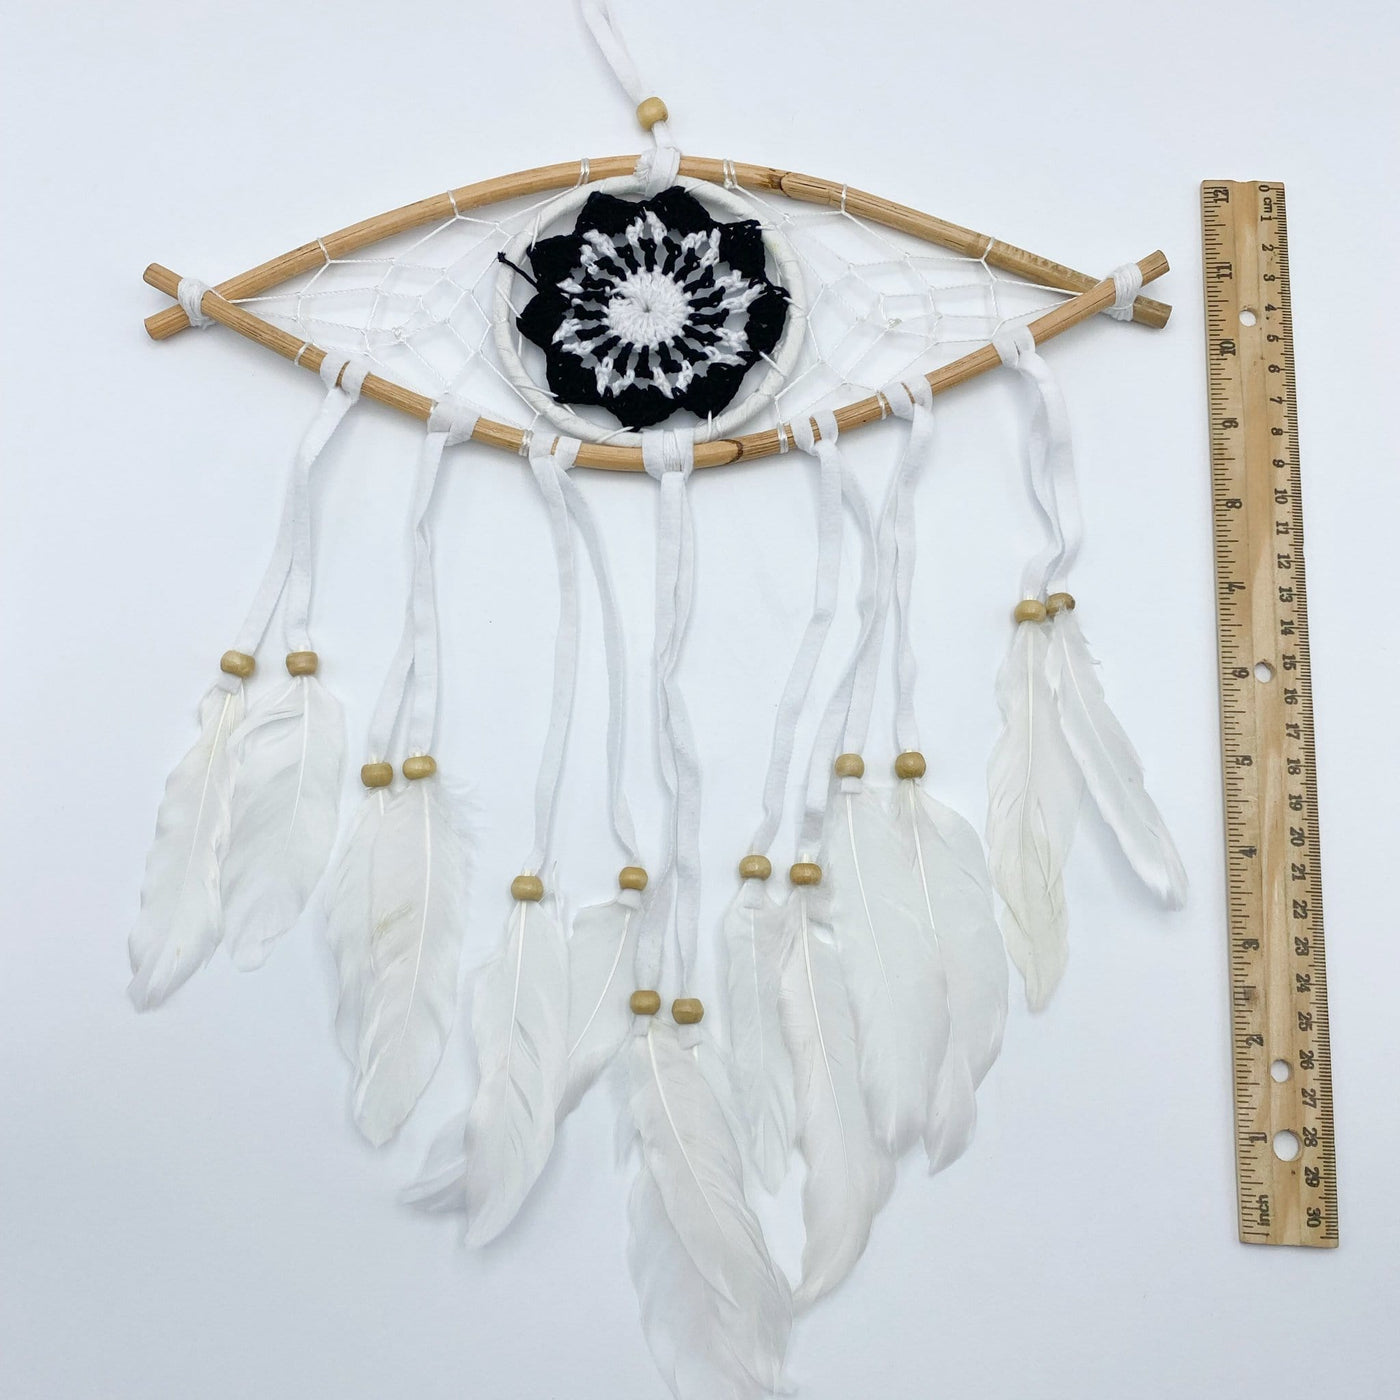 White Dream Catcher with Black All Seeing Eye Pattern next to ruler for size reference